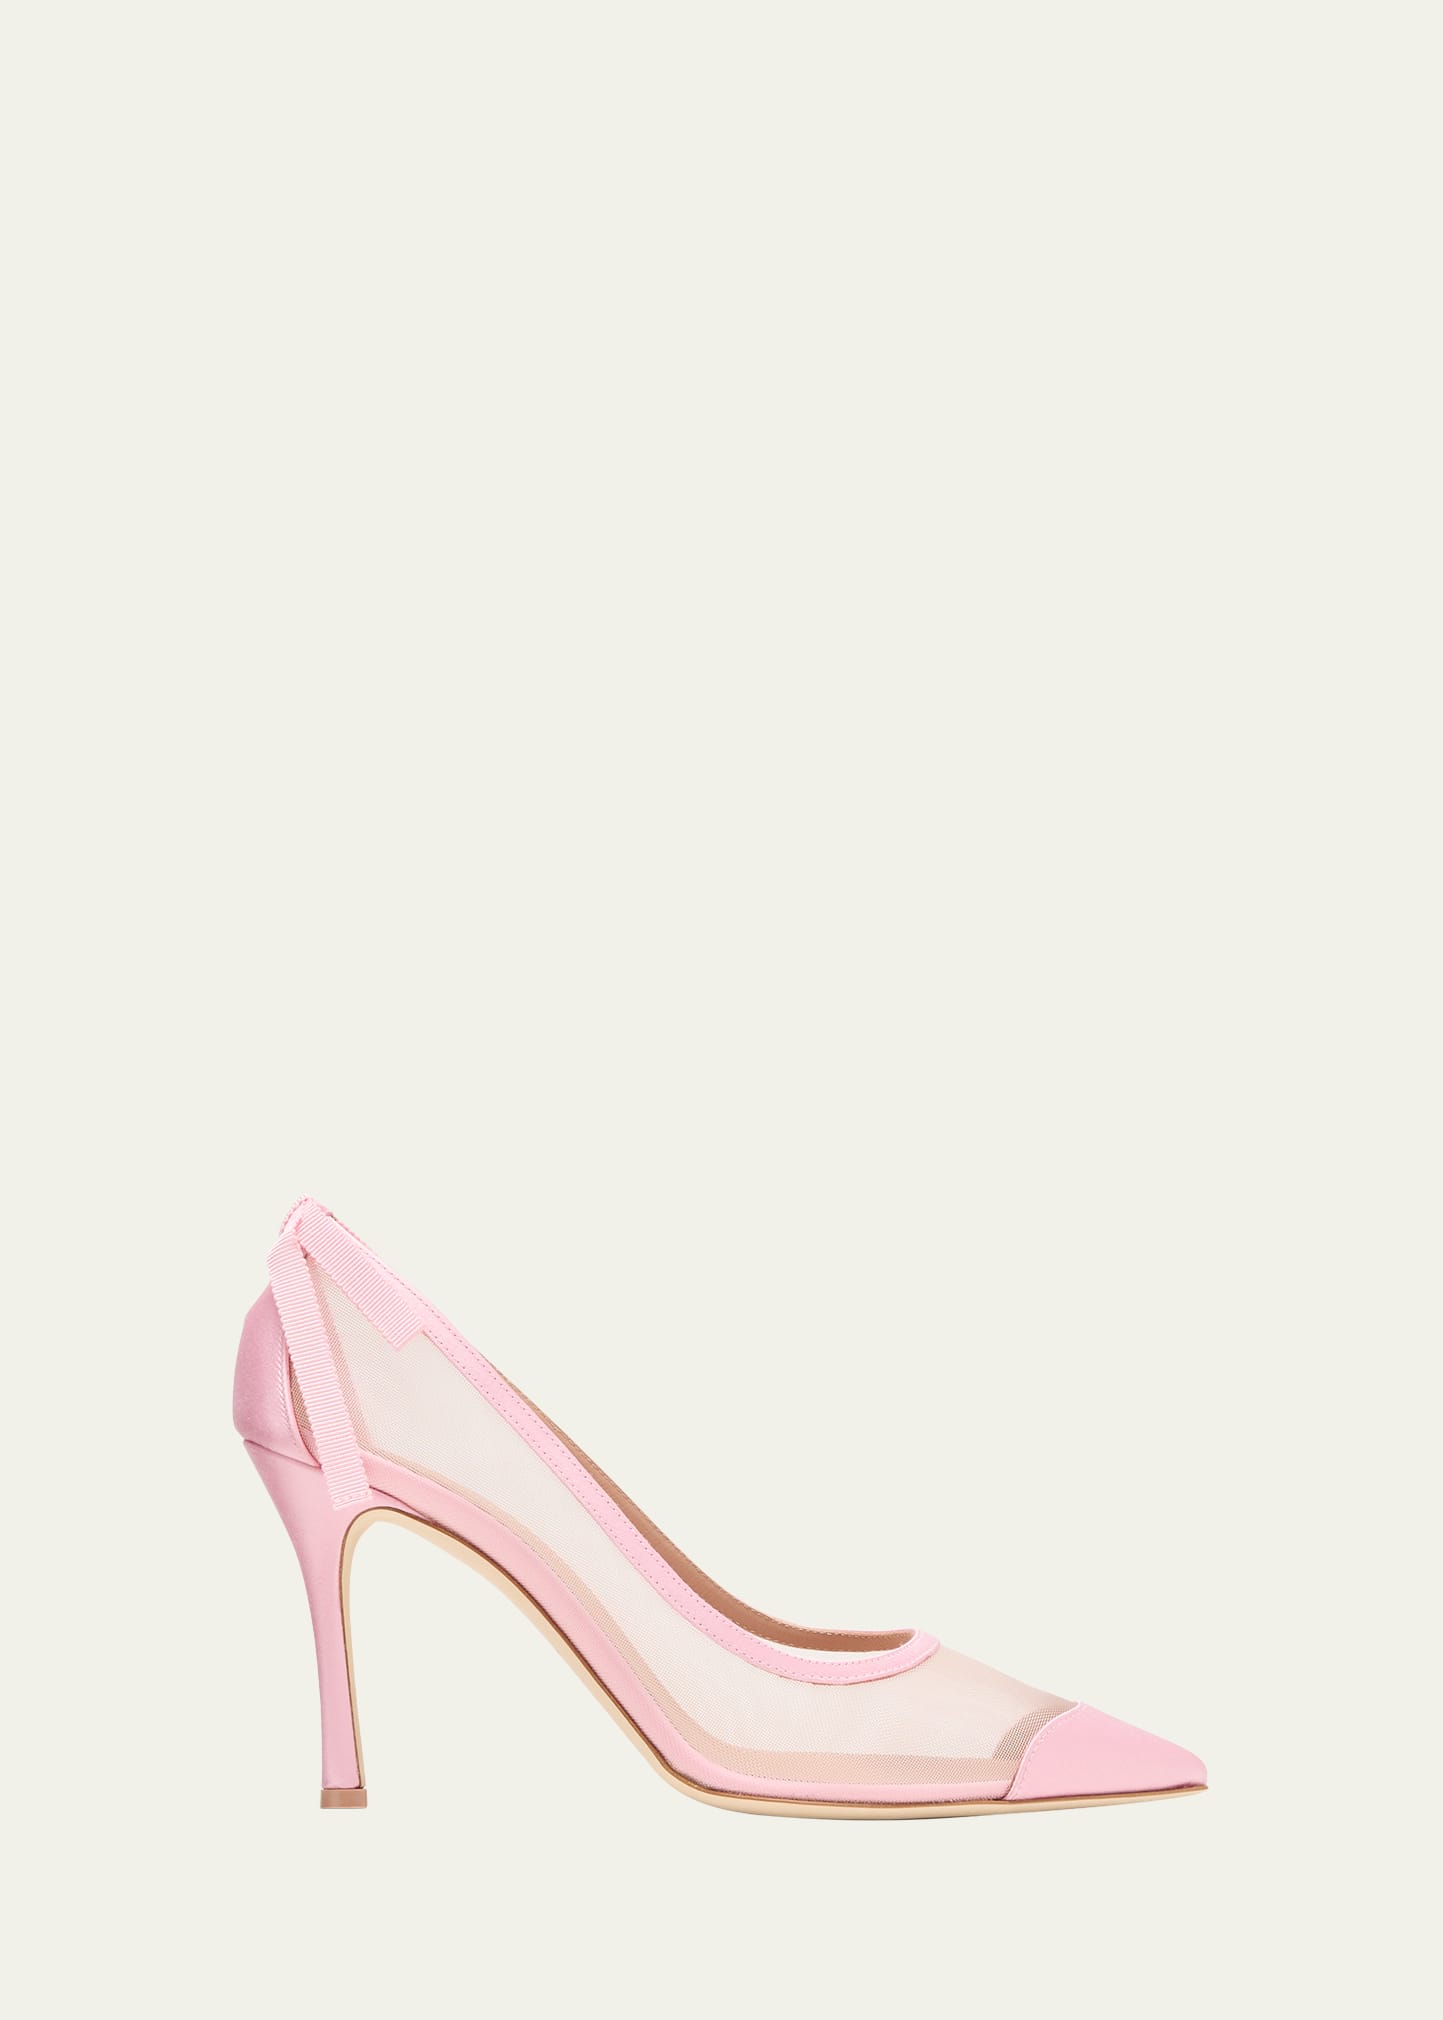 Malone Souliers Liberty Satin Mesh Stiletto Pumps In Peony Pink